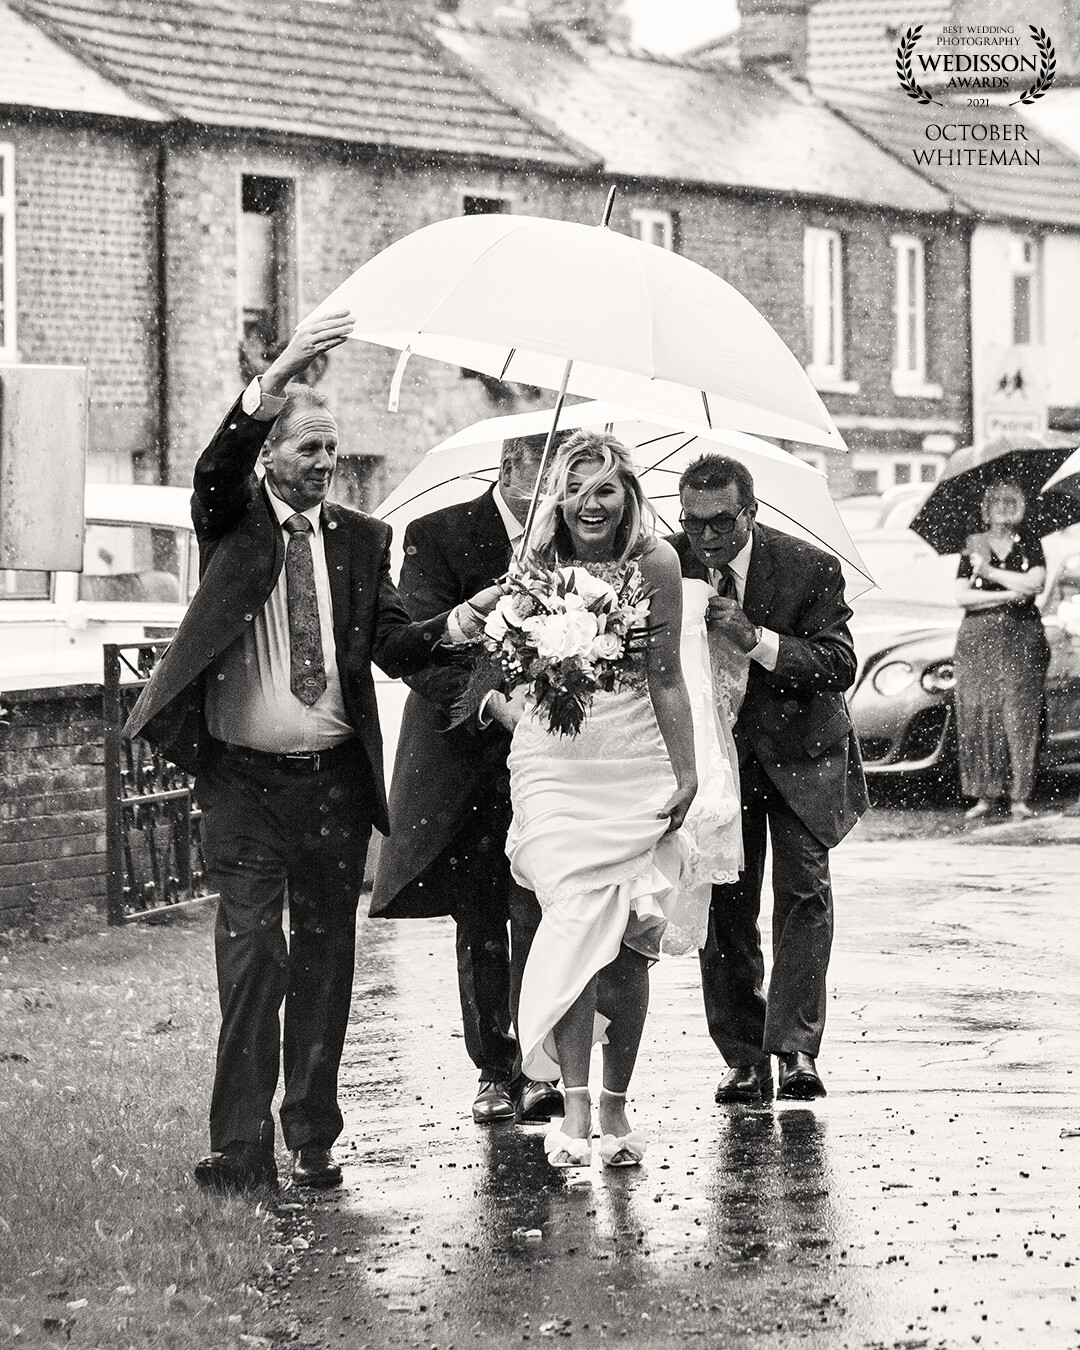 Sophie - always smiling no matter what the weather! After postponing her wedding from 2020 she couldn’t be happier to finally walk down that aisle! Oh and by the time the newly weds emerged from the church, the storm clouds had passed and the sun shone for the rest of the day!